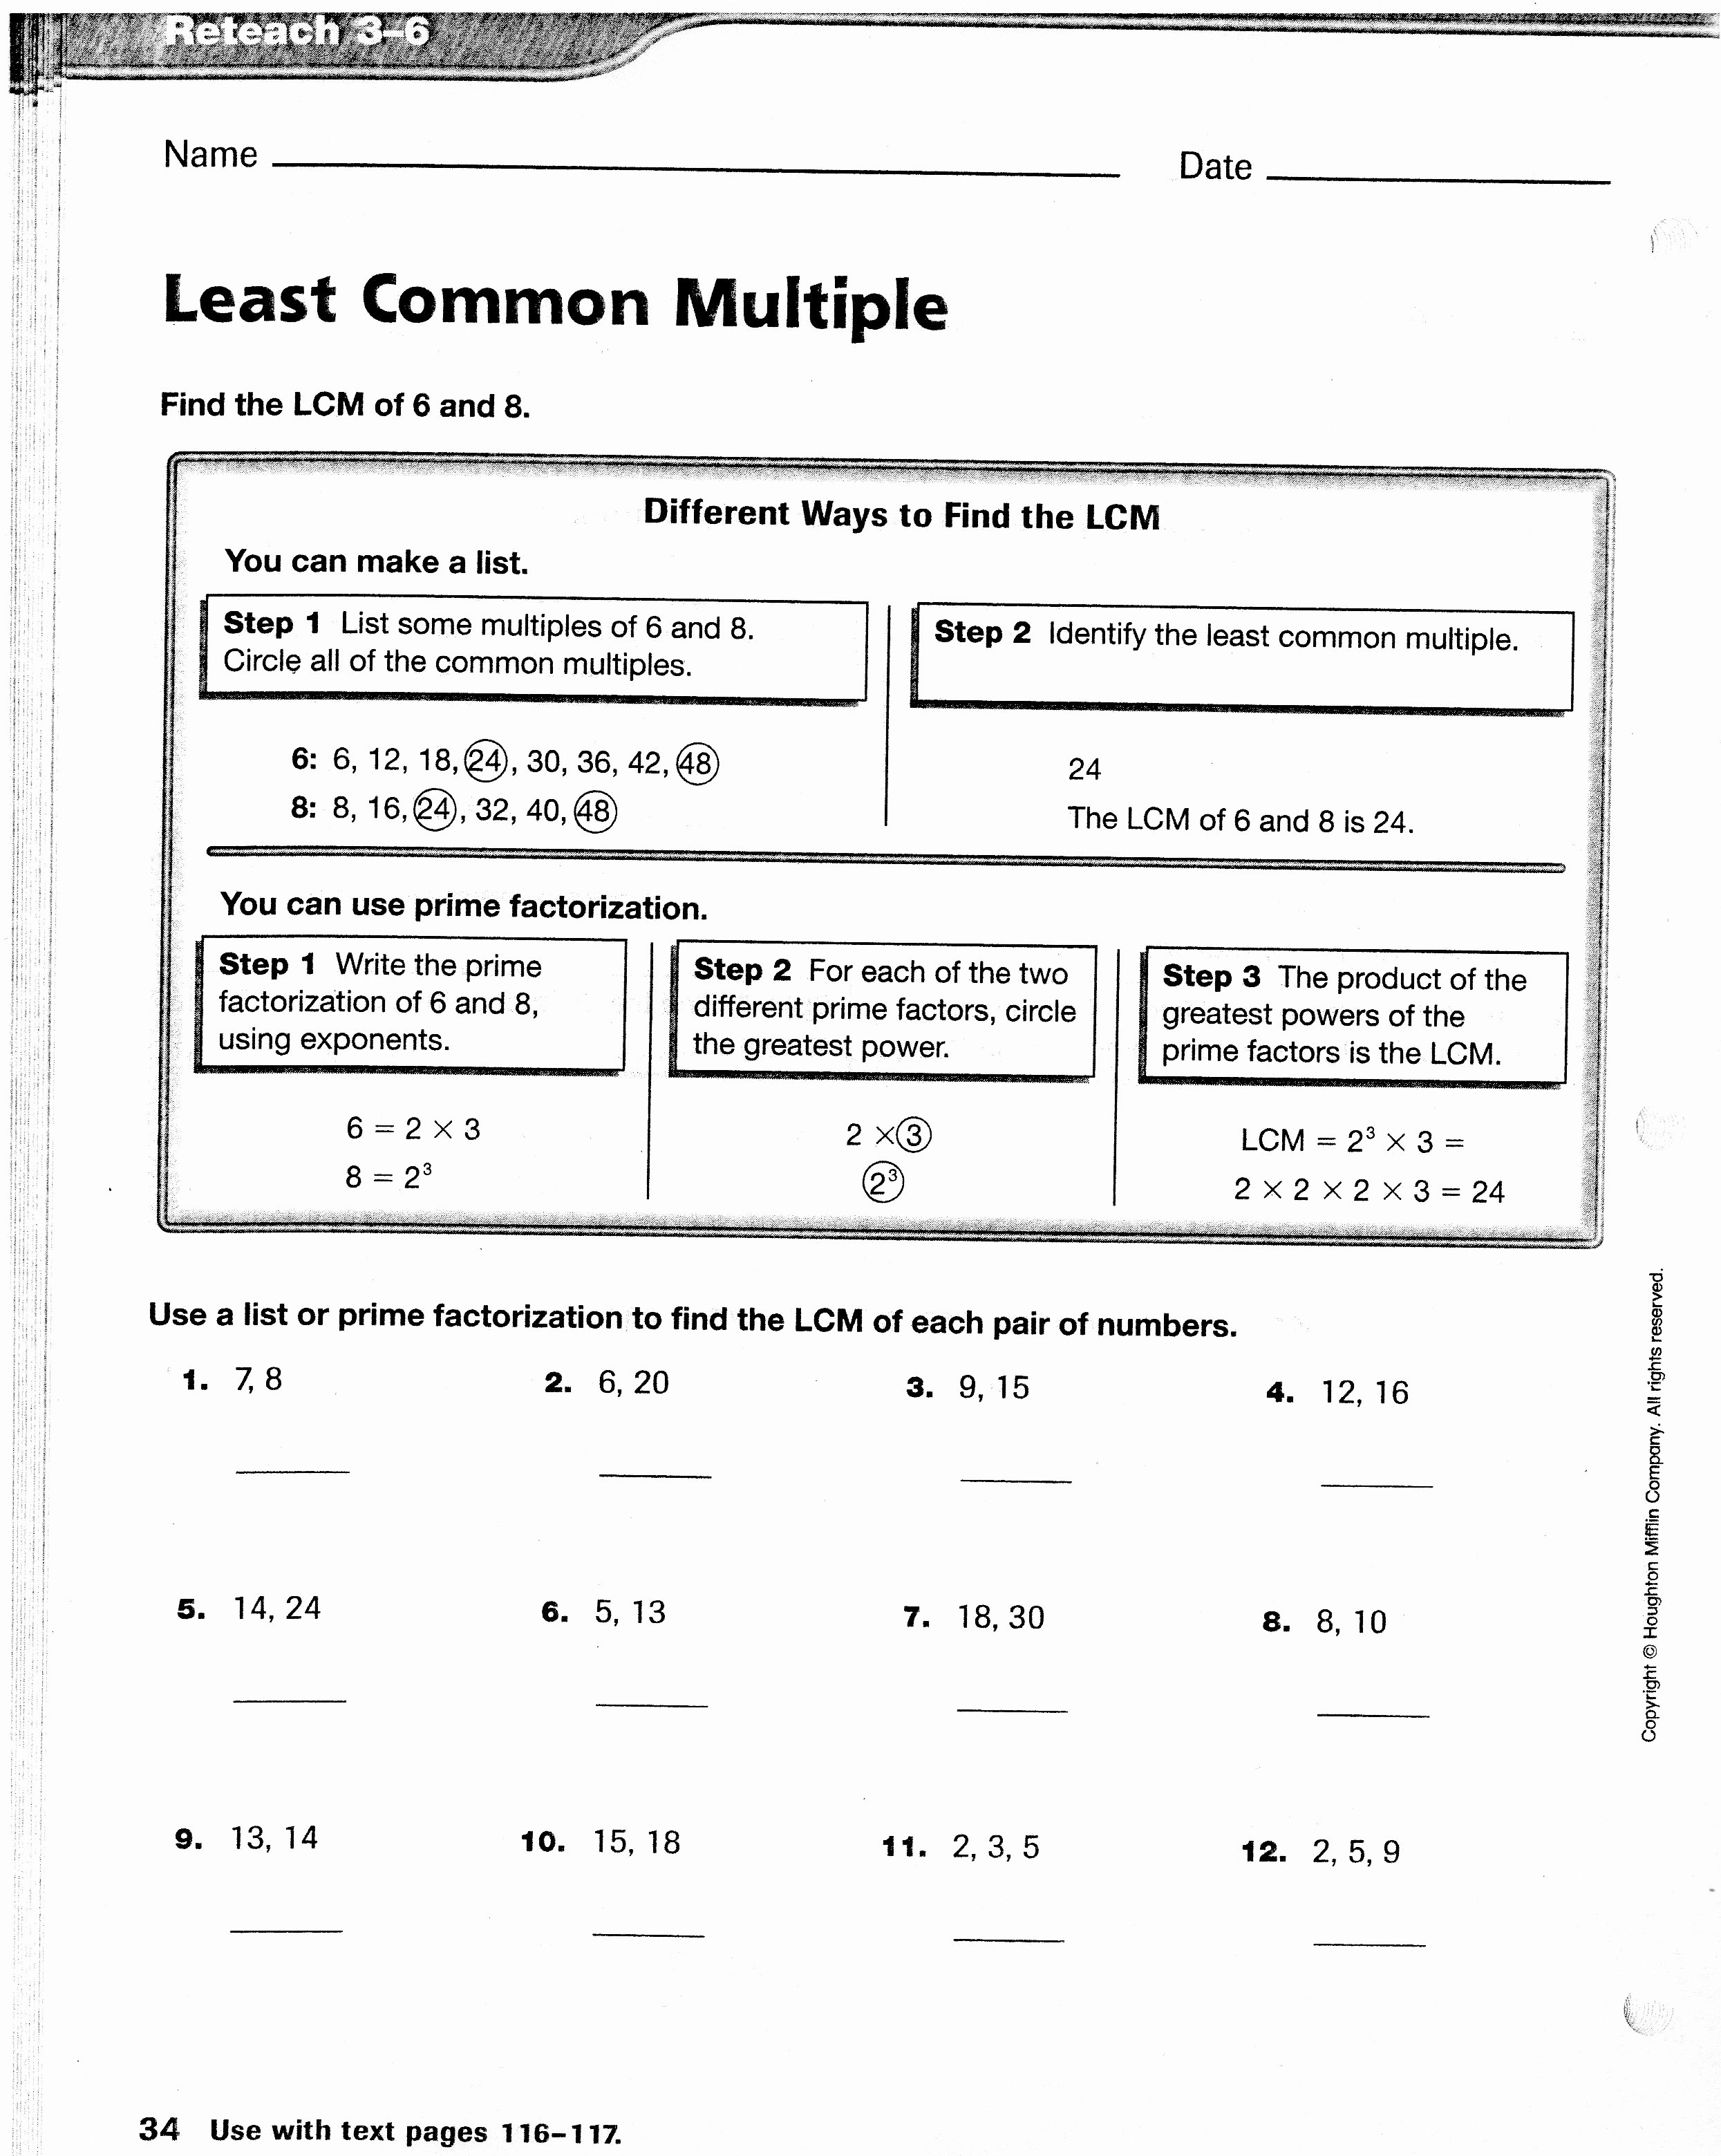 50 Least Common Multiple Worksheet Chessmuseum Template Library